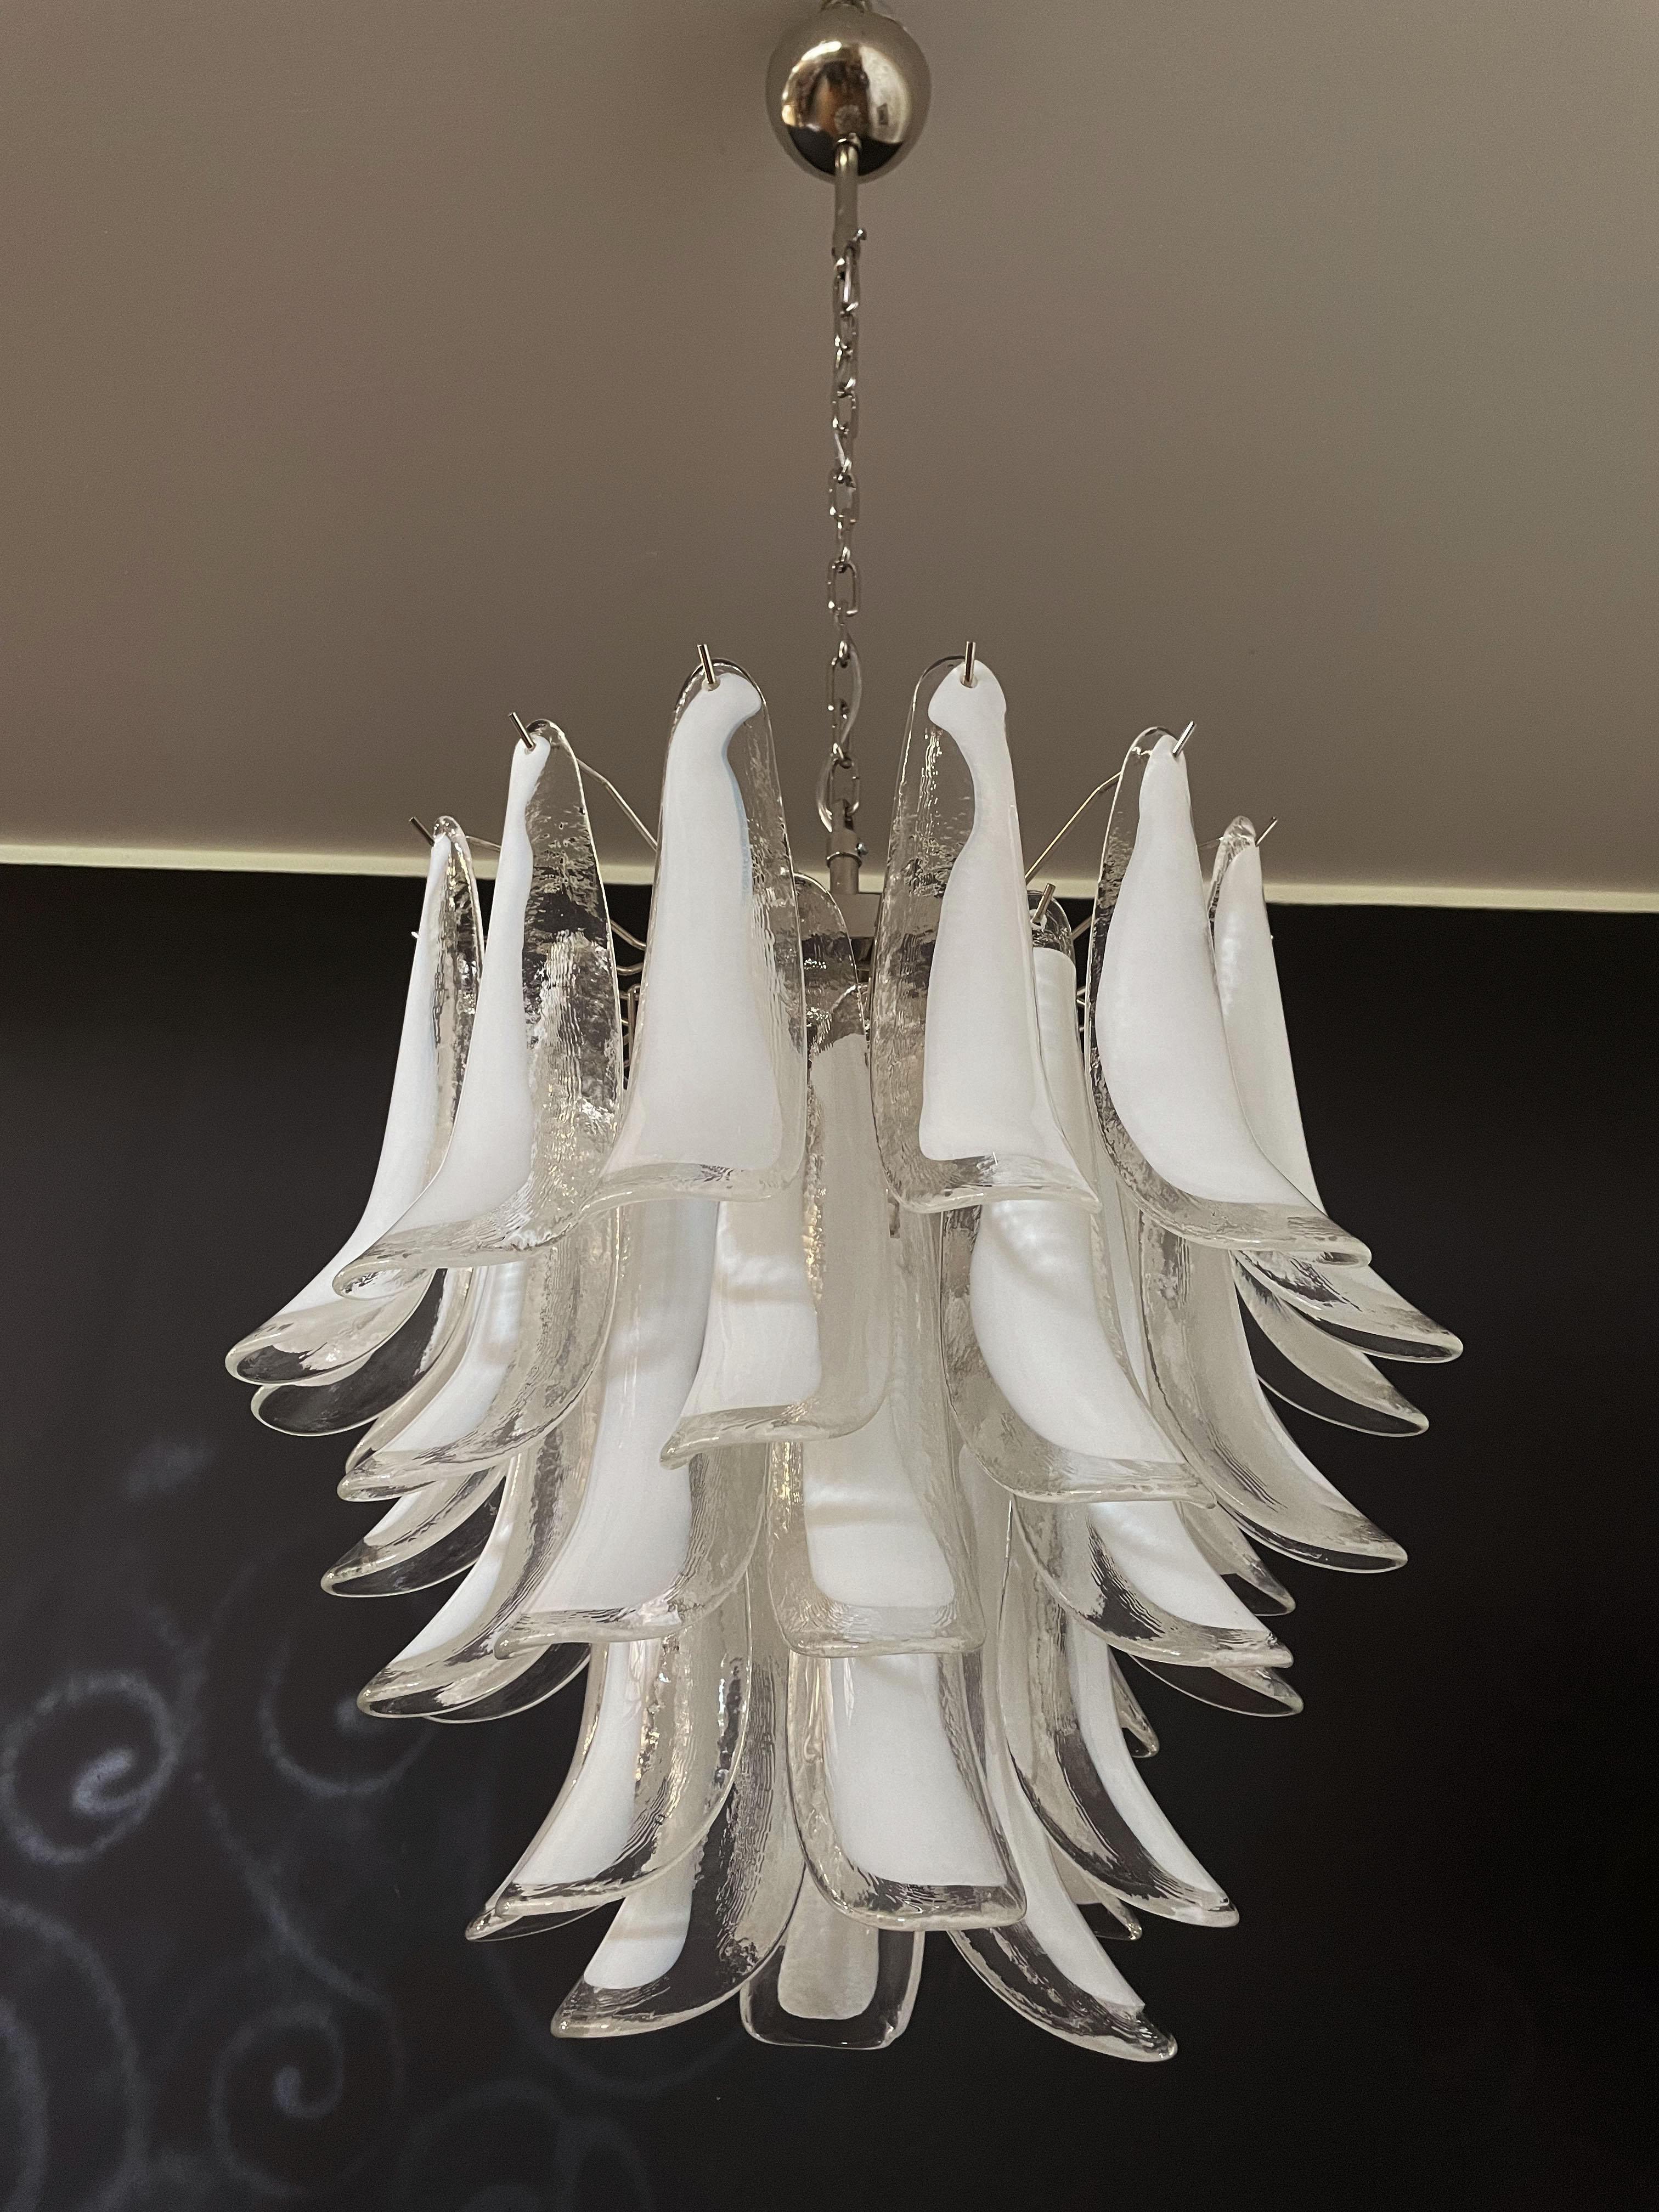 Late 20th Century Italian Vintage Murano Chandelier in the Manner of Mazzega, 41 Glass Petals